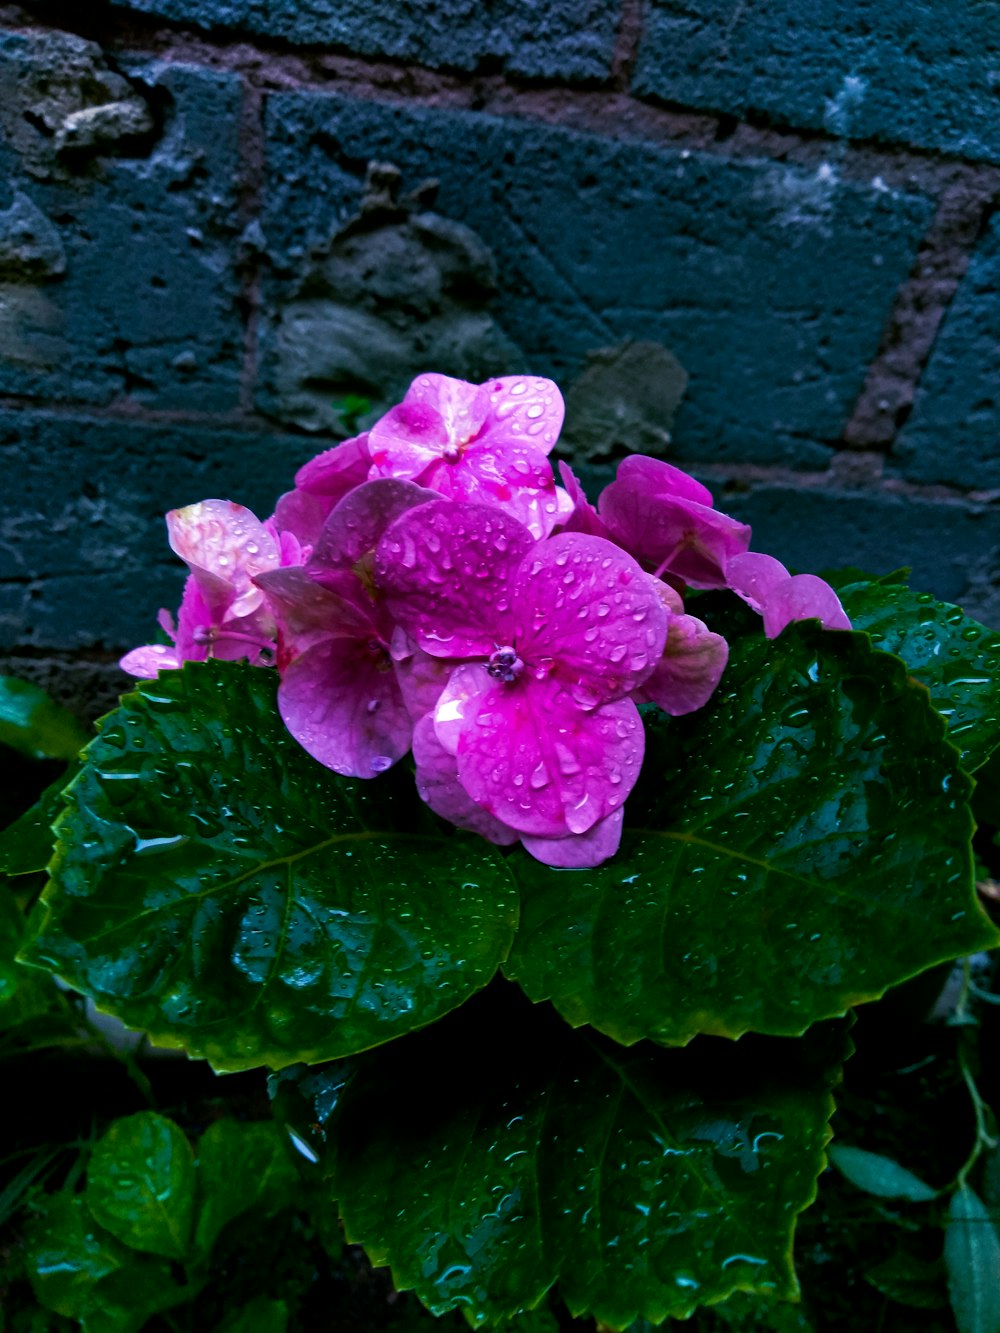 a pink flower with green leaves in front of a brick wall